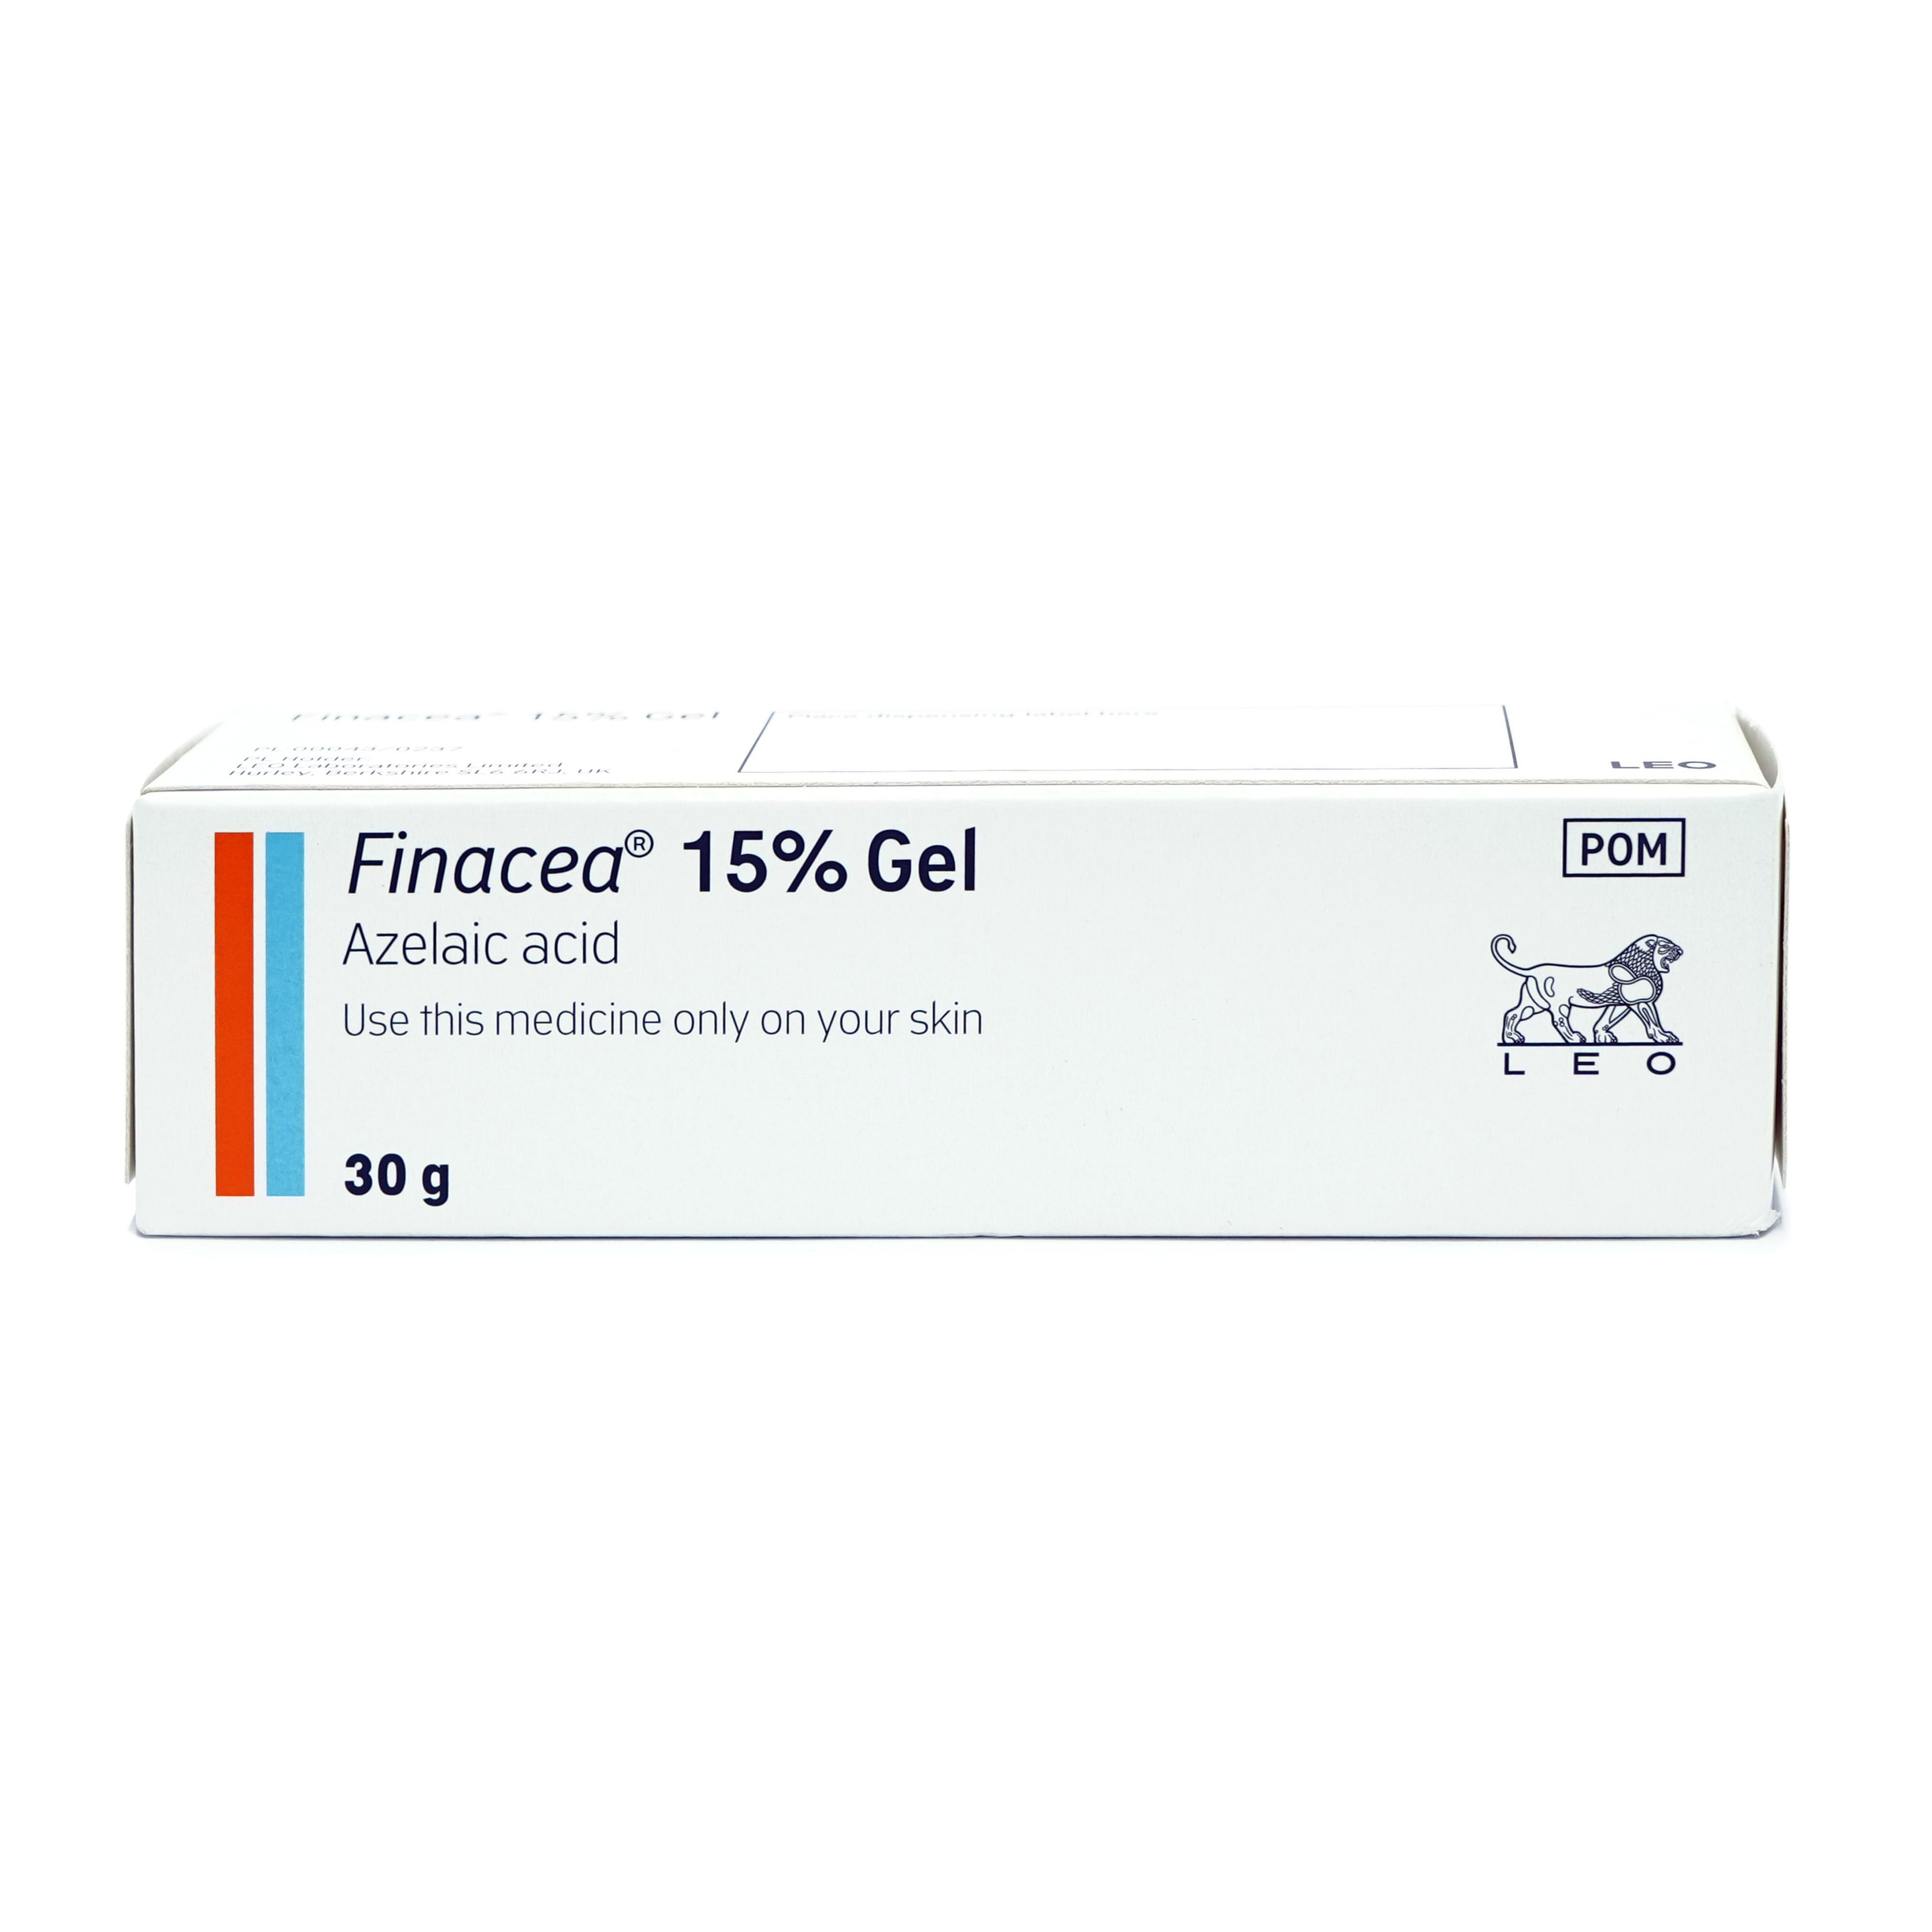 The front of a box of Finacea gel 